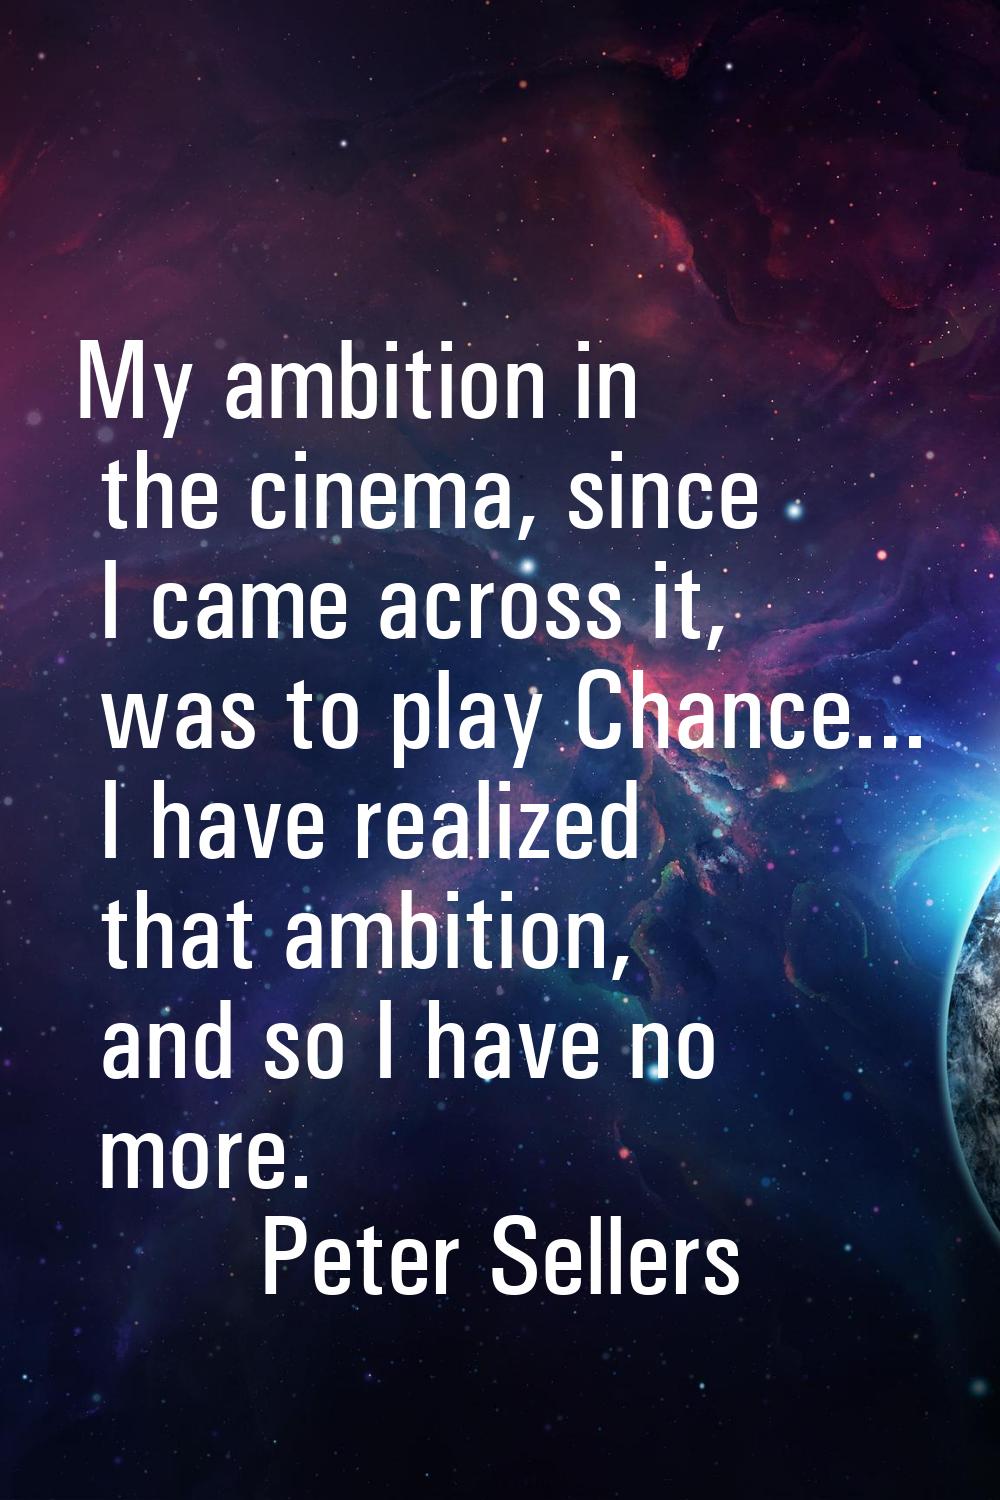 My ambition in the cinema, since I came across it, was to play Chance... I have realized that ambit